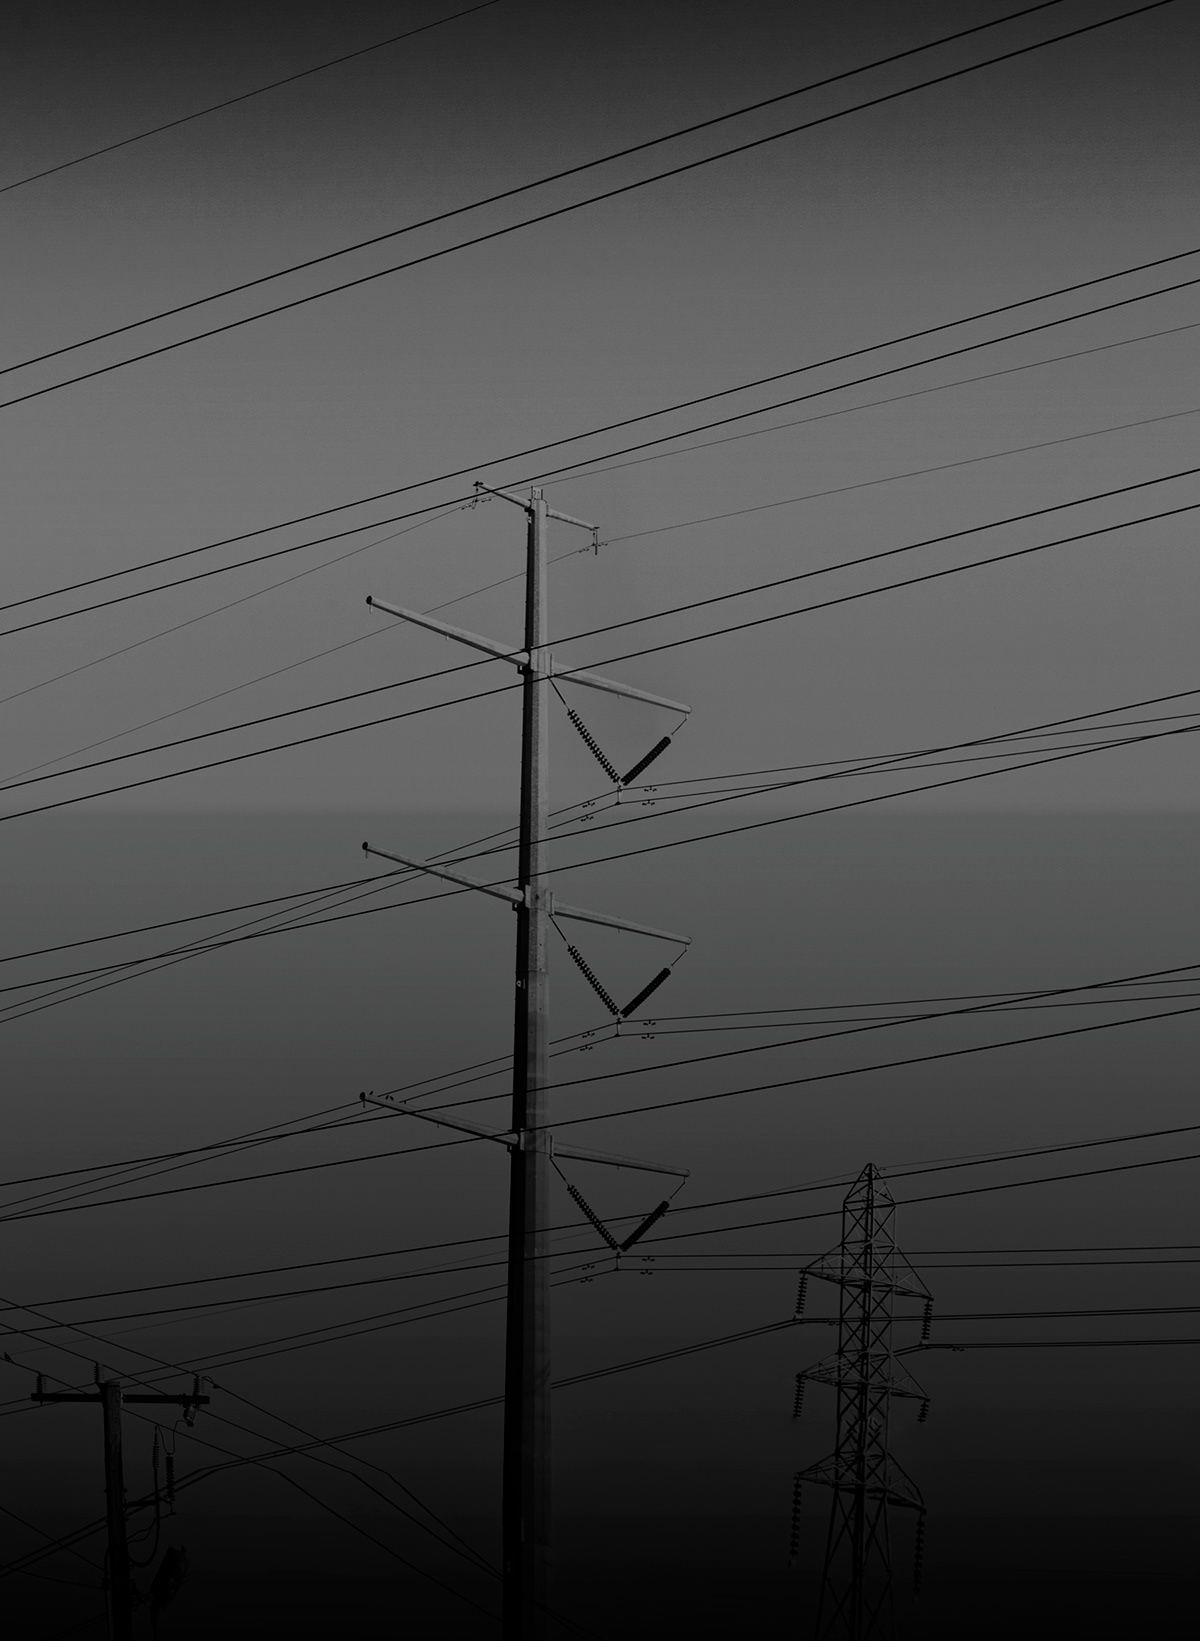 gradient photoshop modern geometry Wires lines Lineage flow Layout design hues magical realism contemporary city Street SKY electricity wire aesthetics thirds rule birds Nature life environment